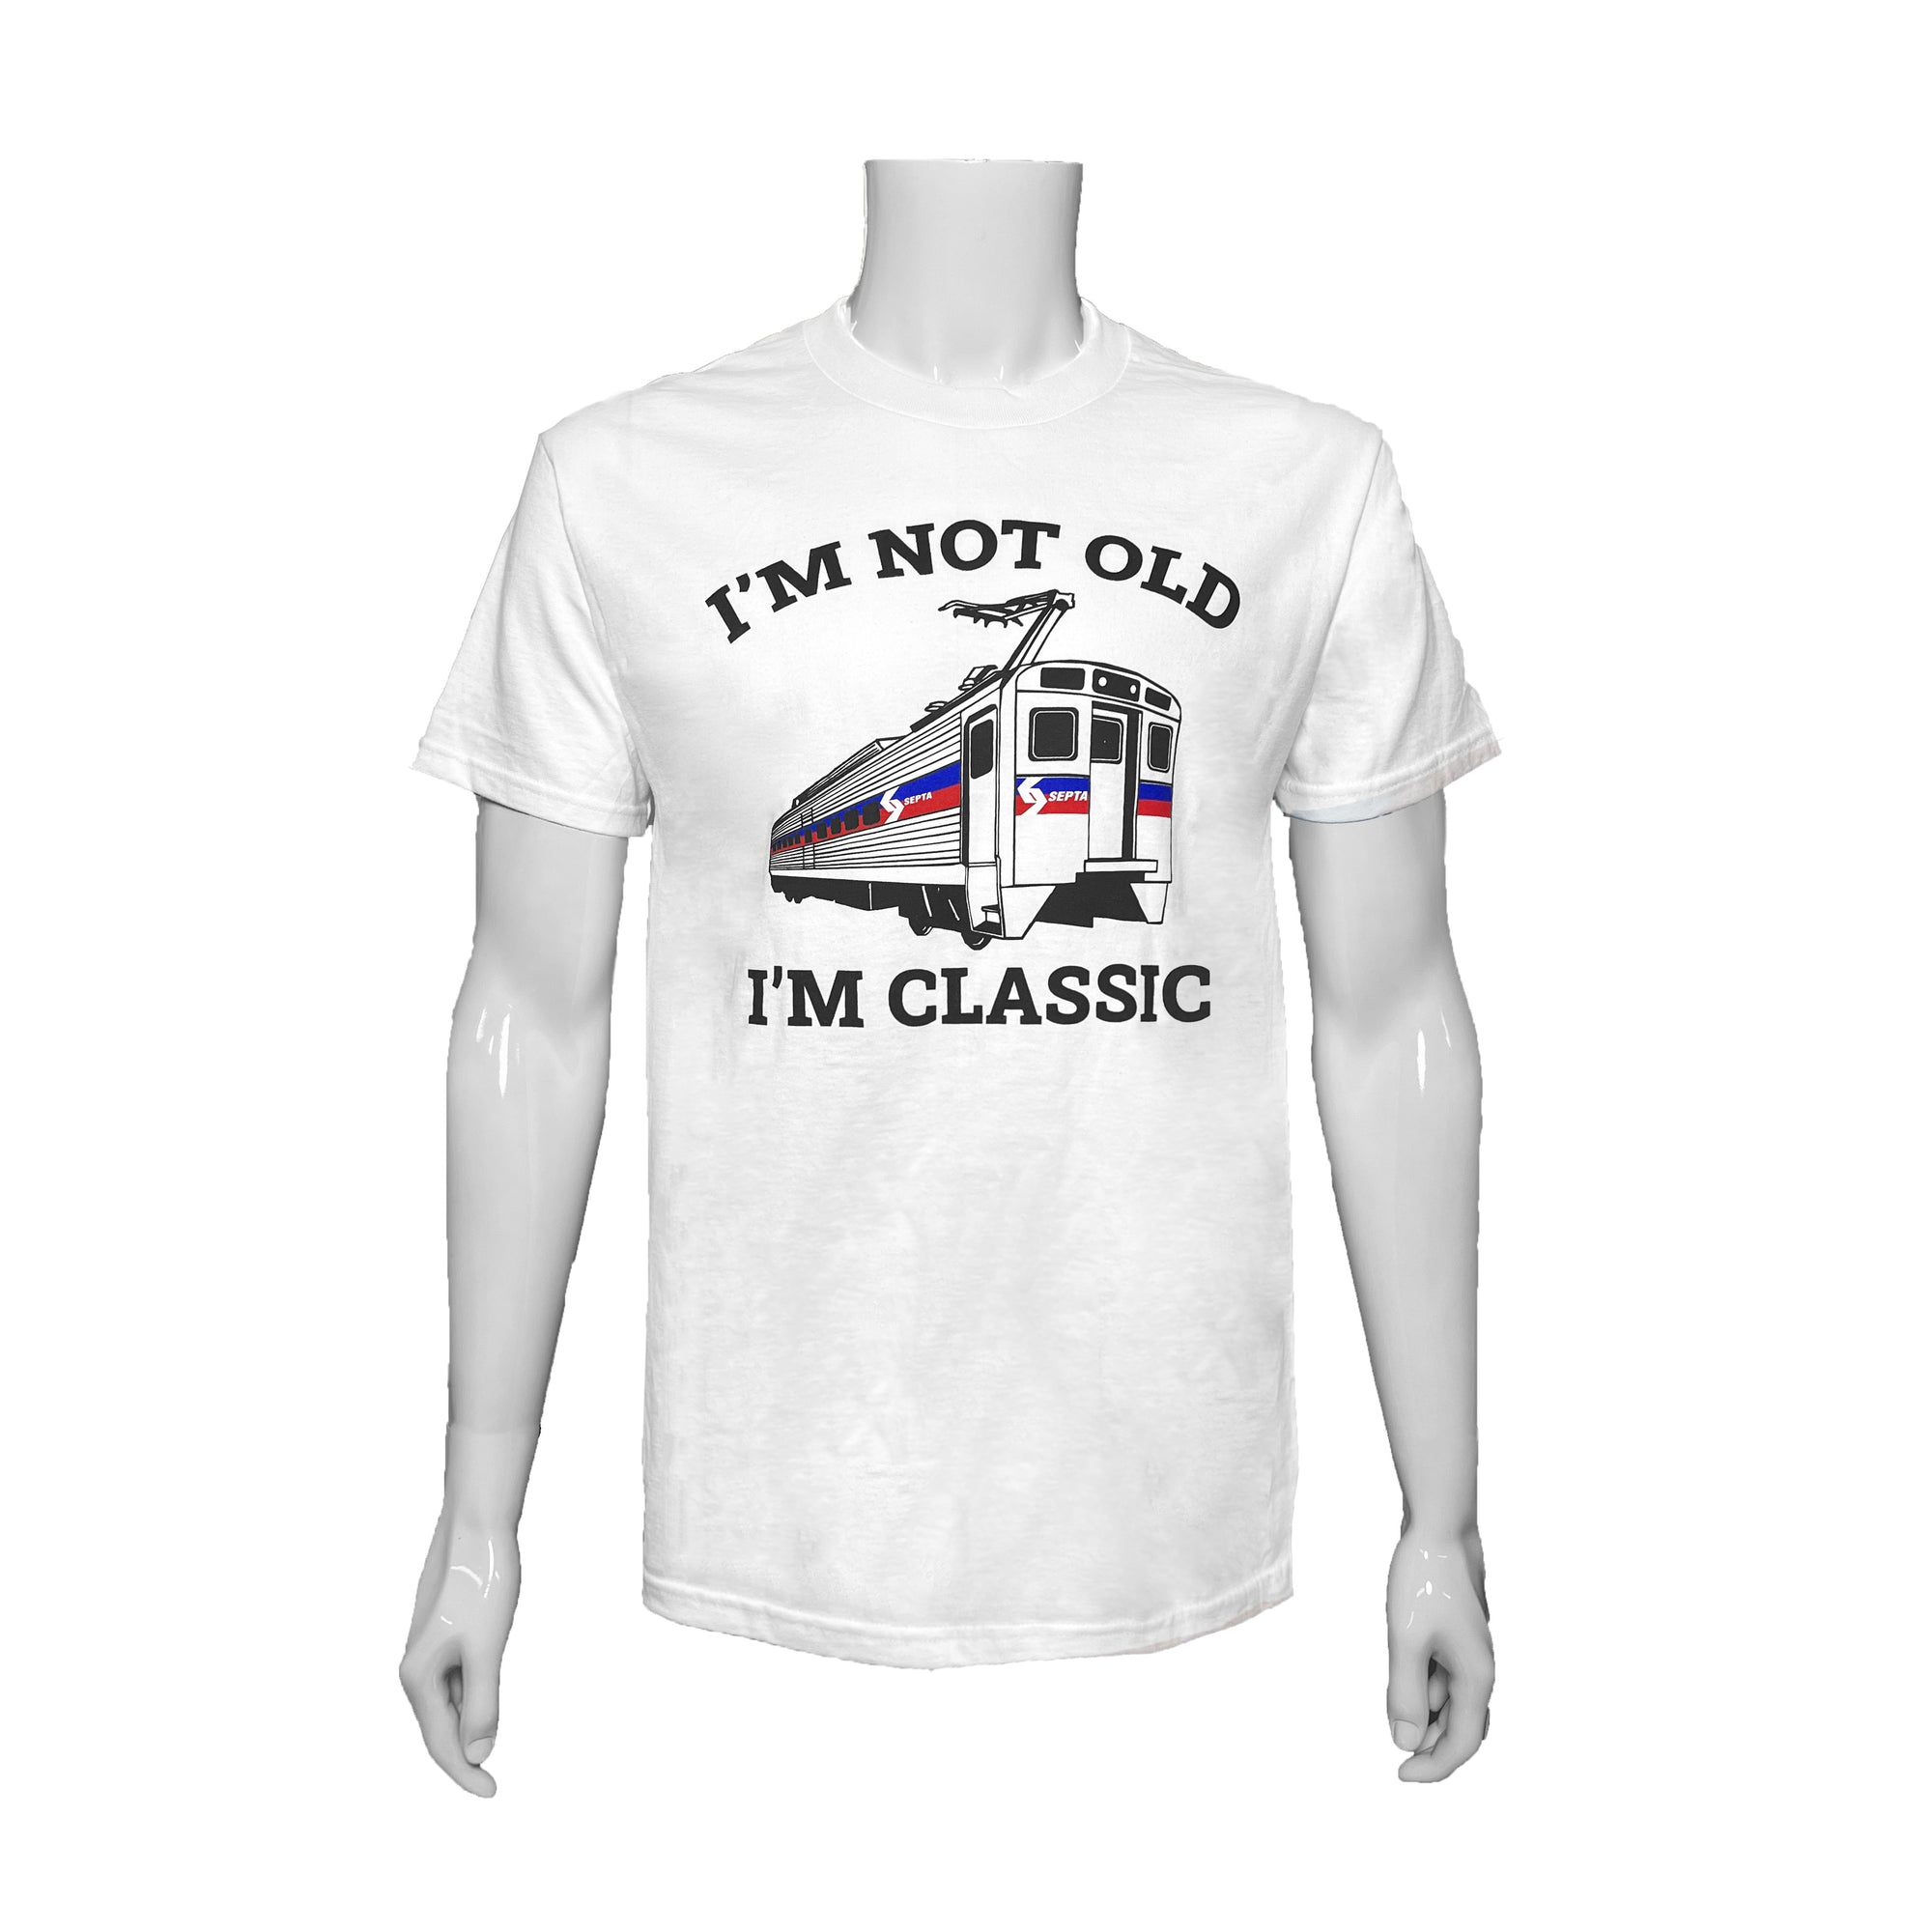 White T-shirt reads I'm not old, I'm Classic in capital black letters. Text sandwiches a large picture of a Silverliner train.